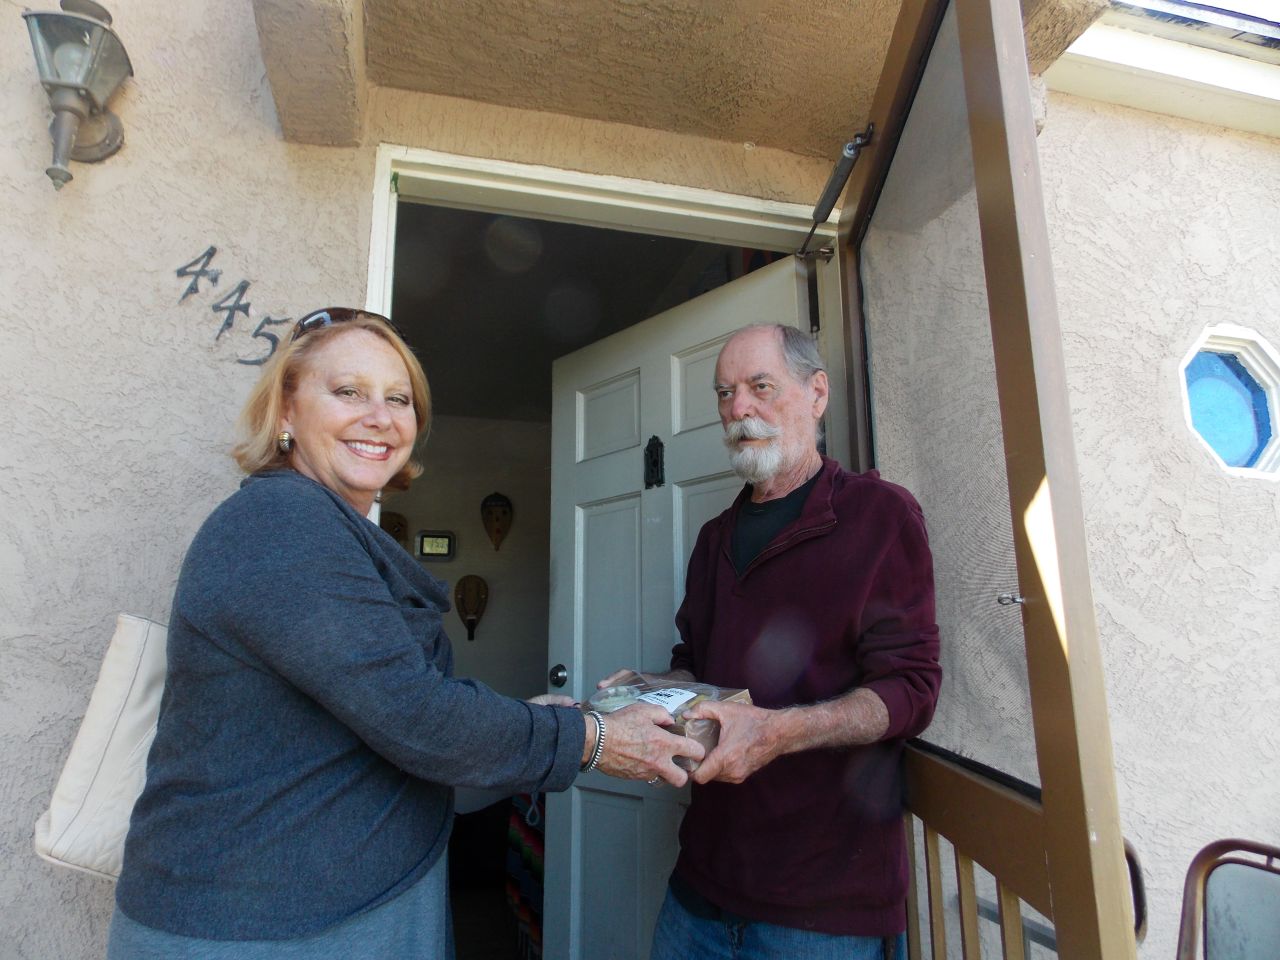 Debbie Case, CEO of the Meals on Wheels San Diego County, delivers lunch and dinner to 75-year-old David Kelly. Kelly lost his sight about two years ago and reluctantly gave up cooking. 